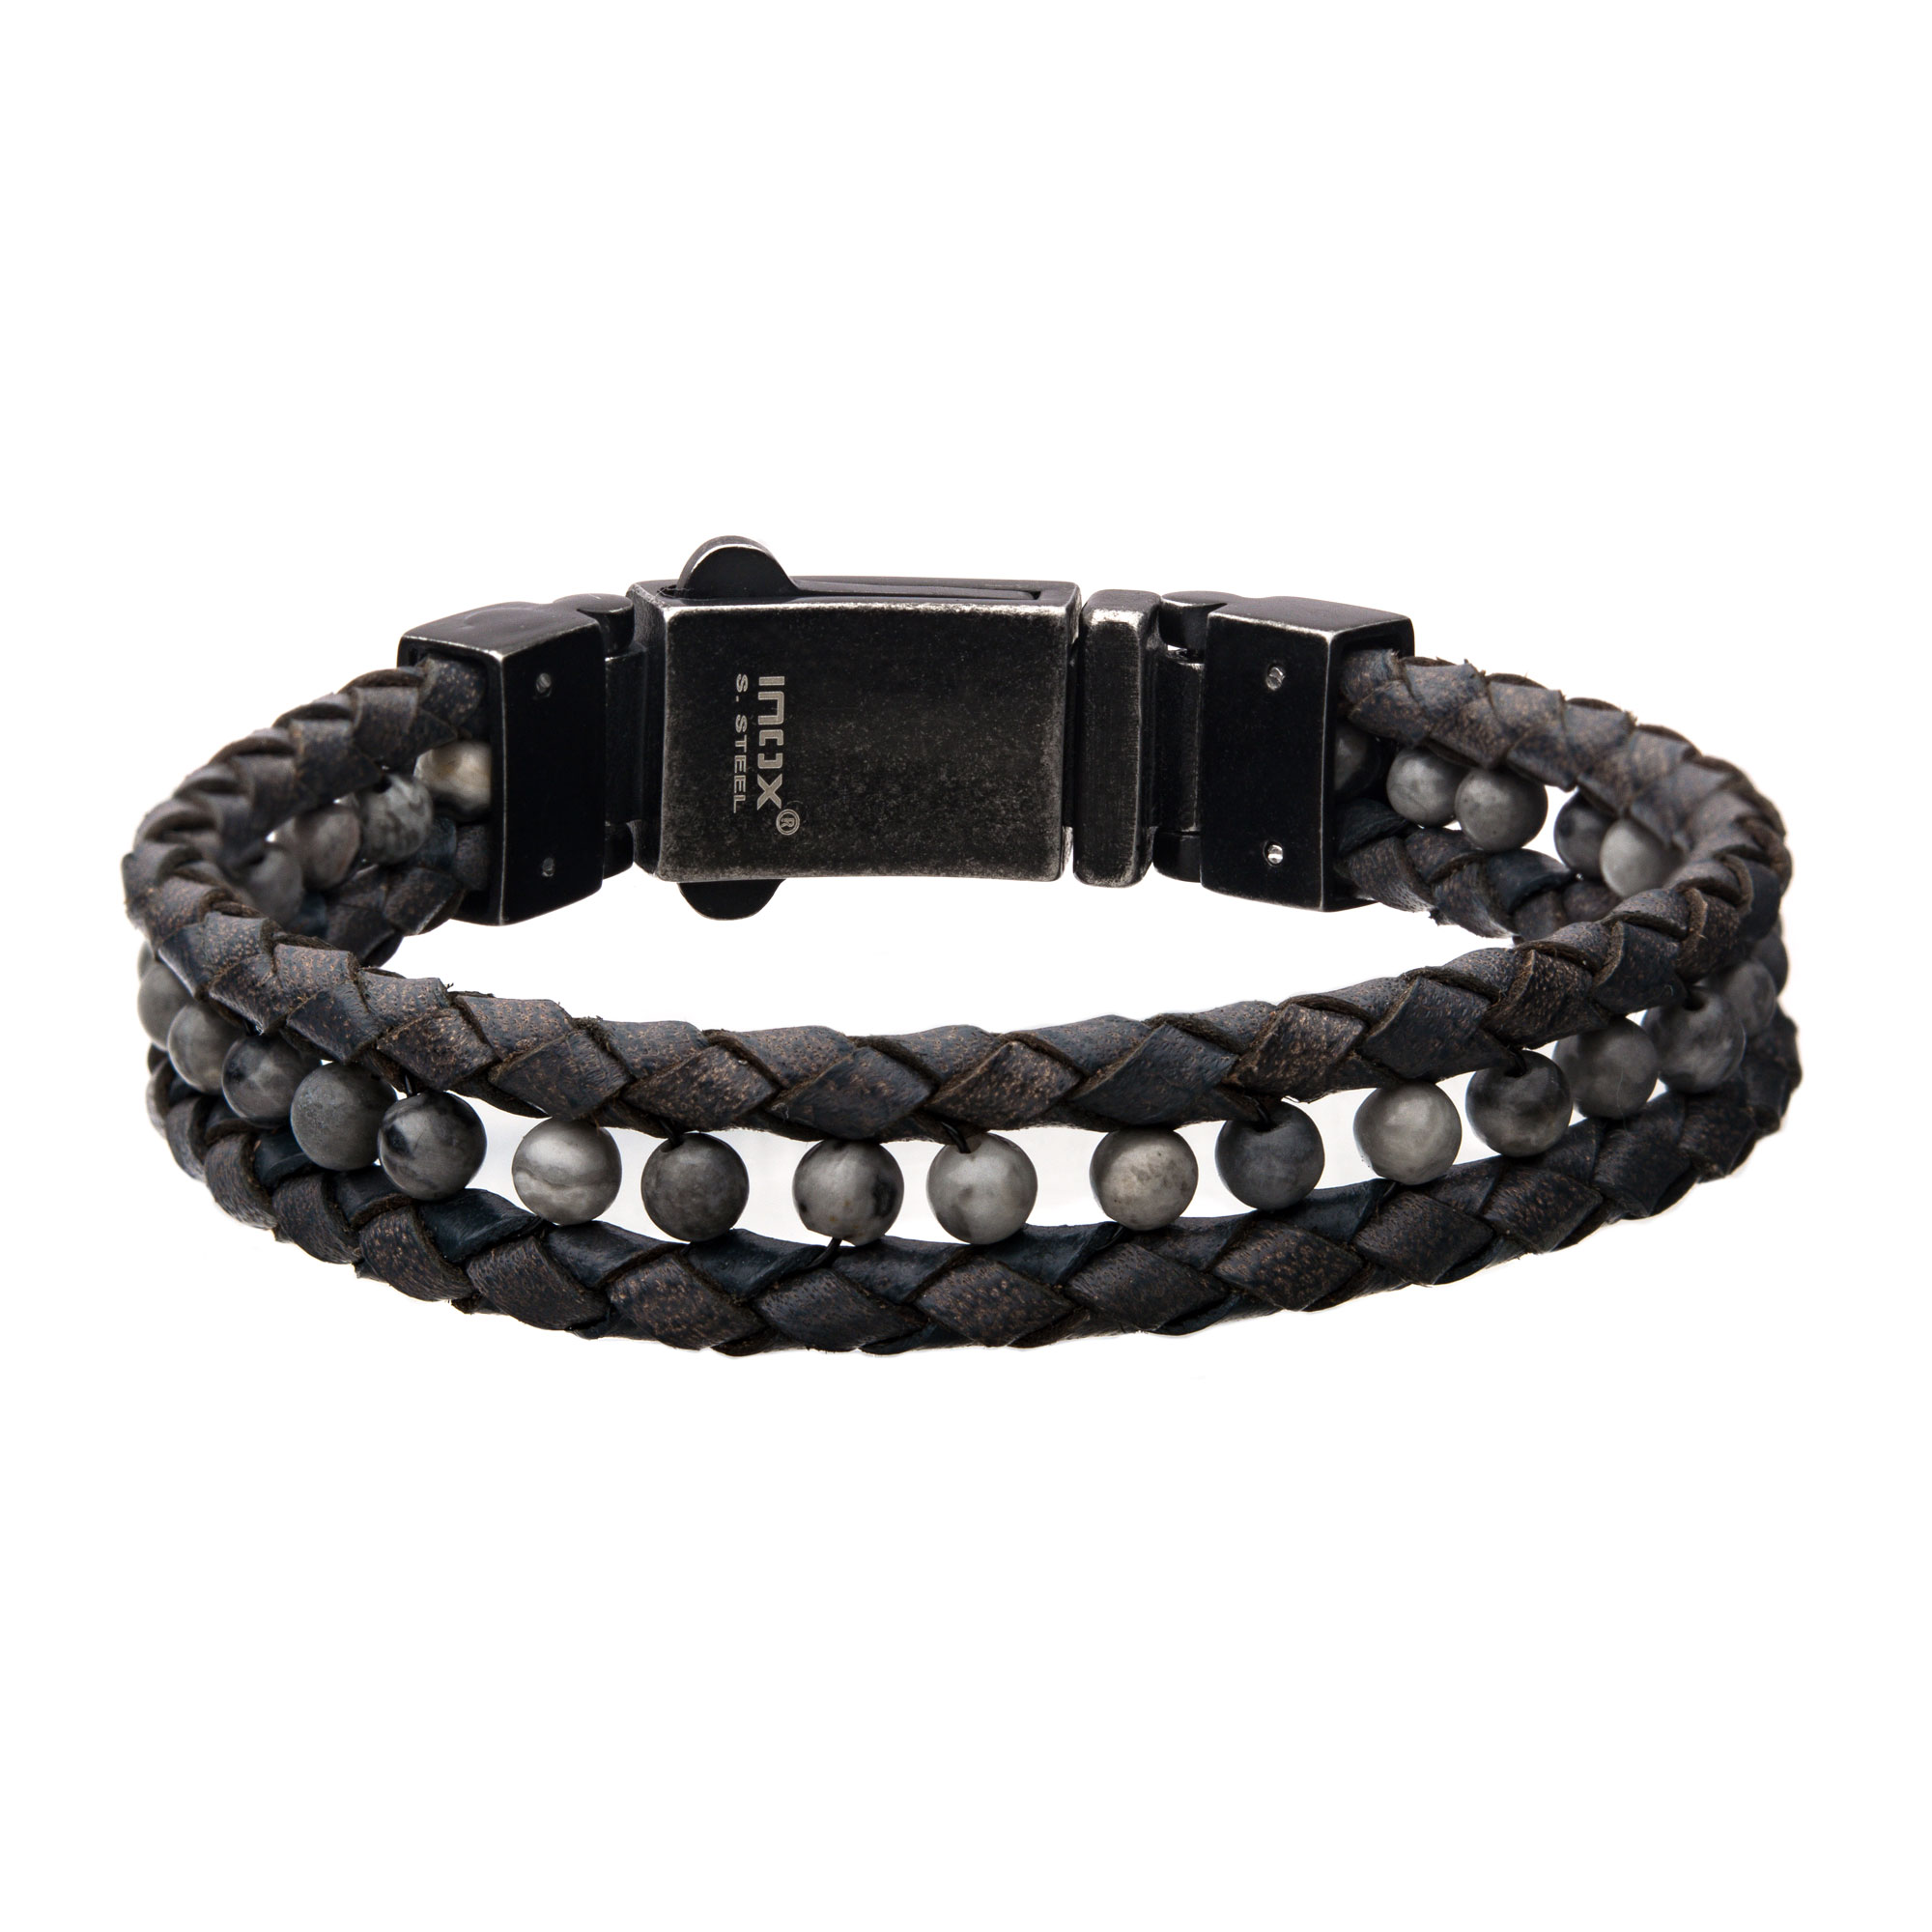 Grey Braided Leather with Howlite Bead Bracelet Lewis Jewelers, Inc. Ansonia, CT